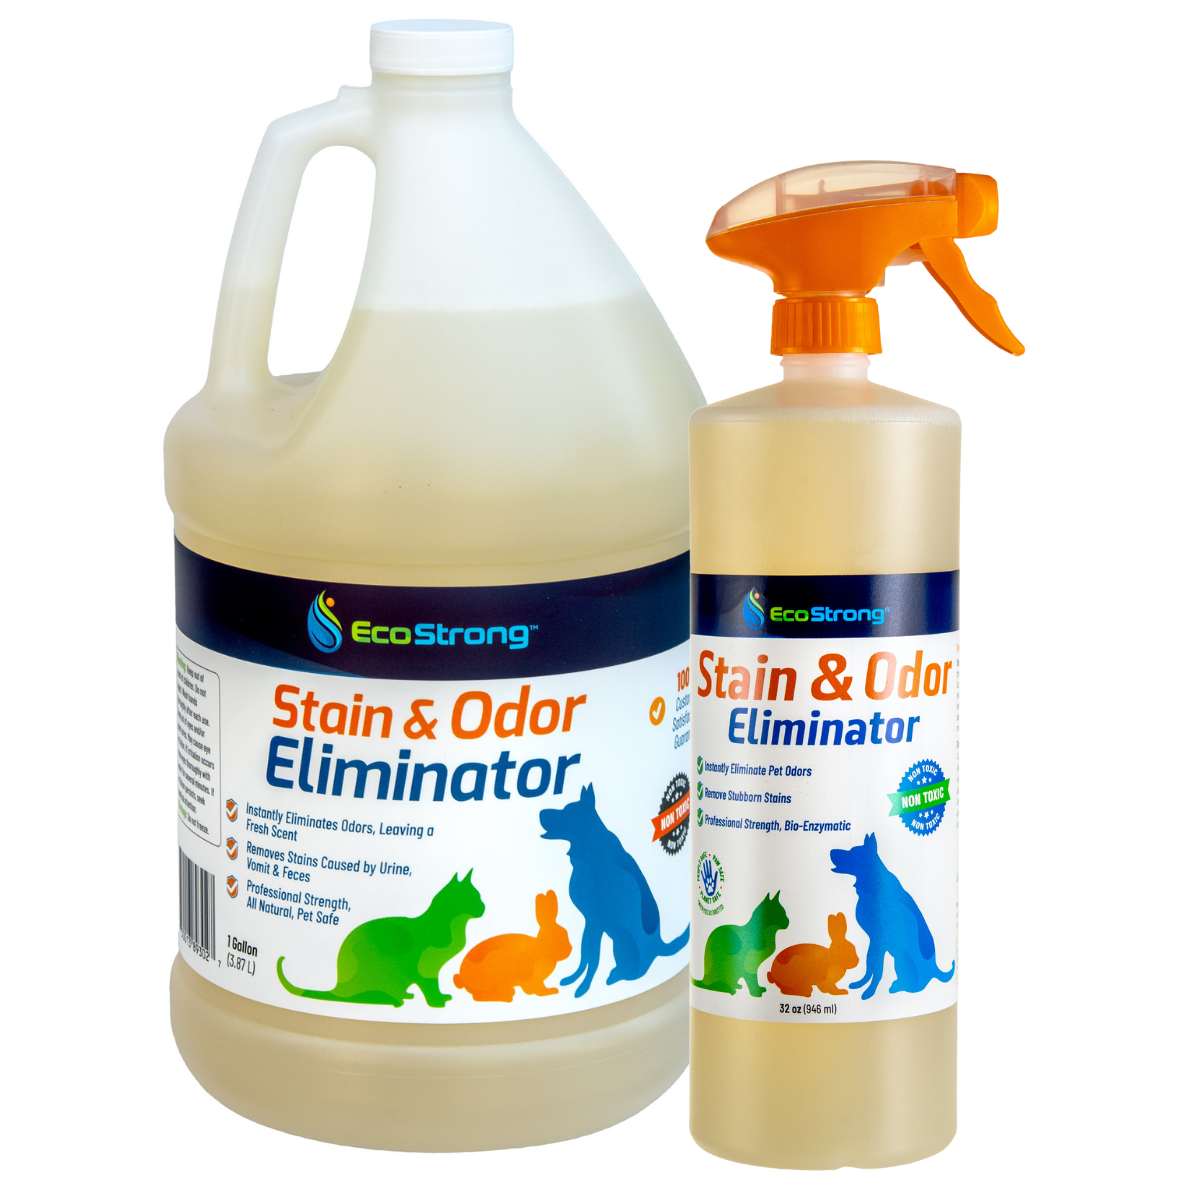 EcoStrong Pet Stain and Odor Eliminator 5 gallon #size_32-oz-sprayer-bottle-and-1-gallon-refill